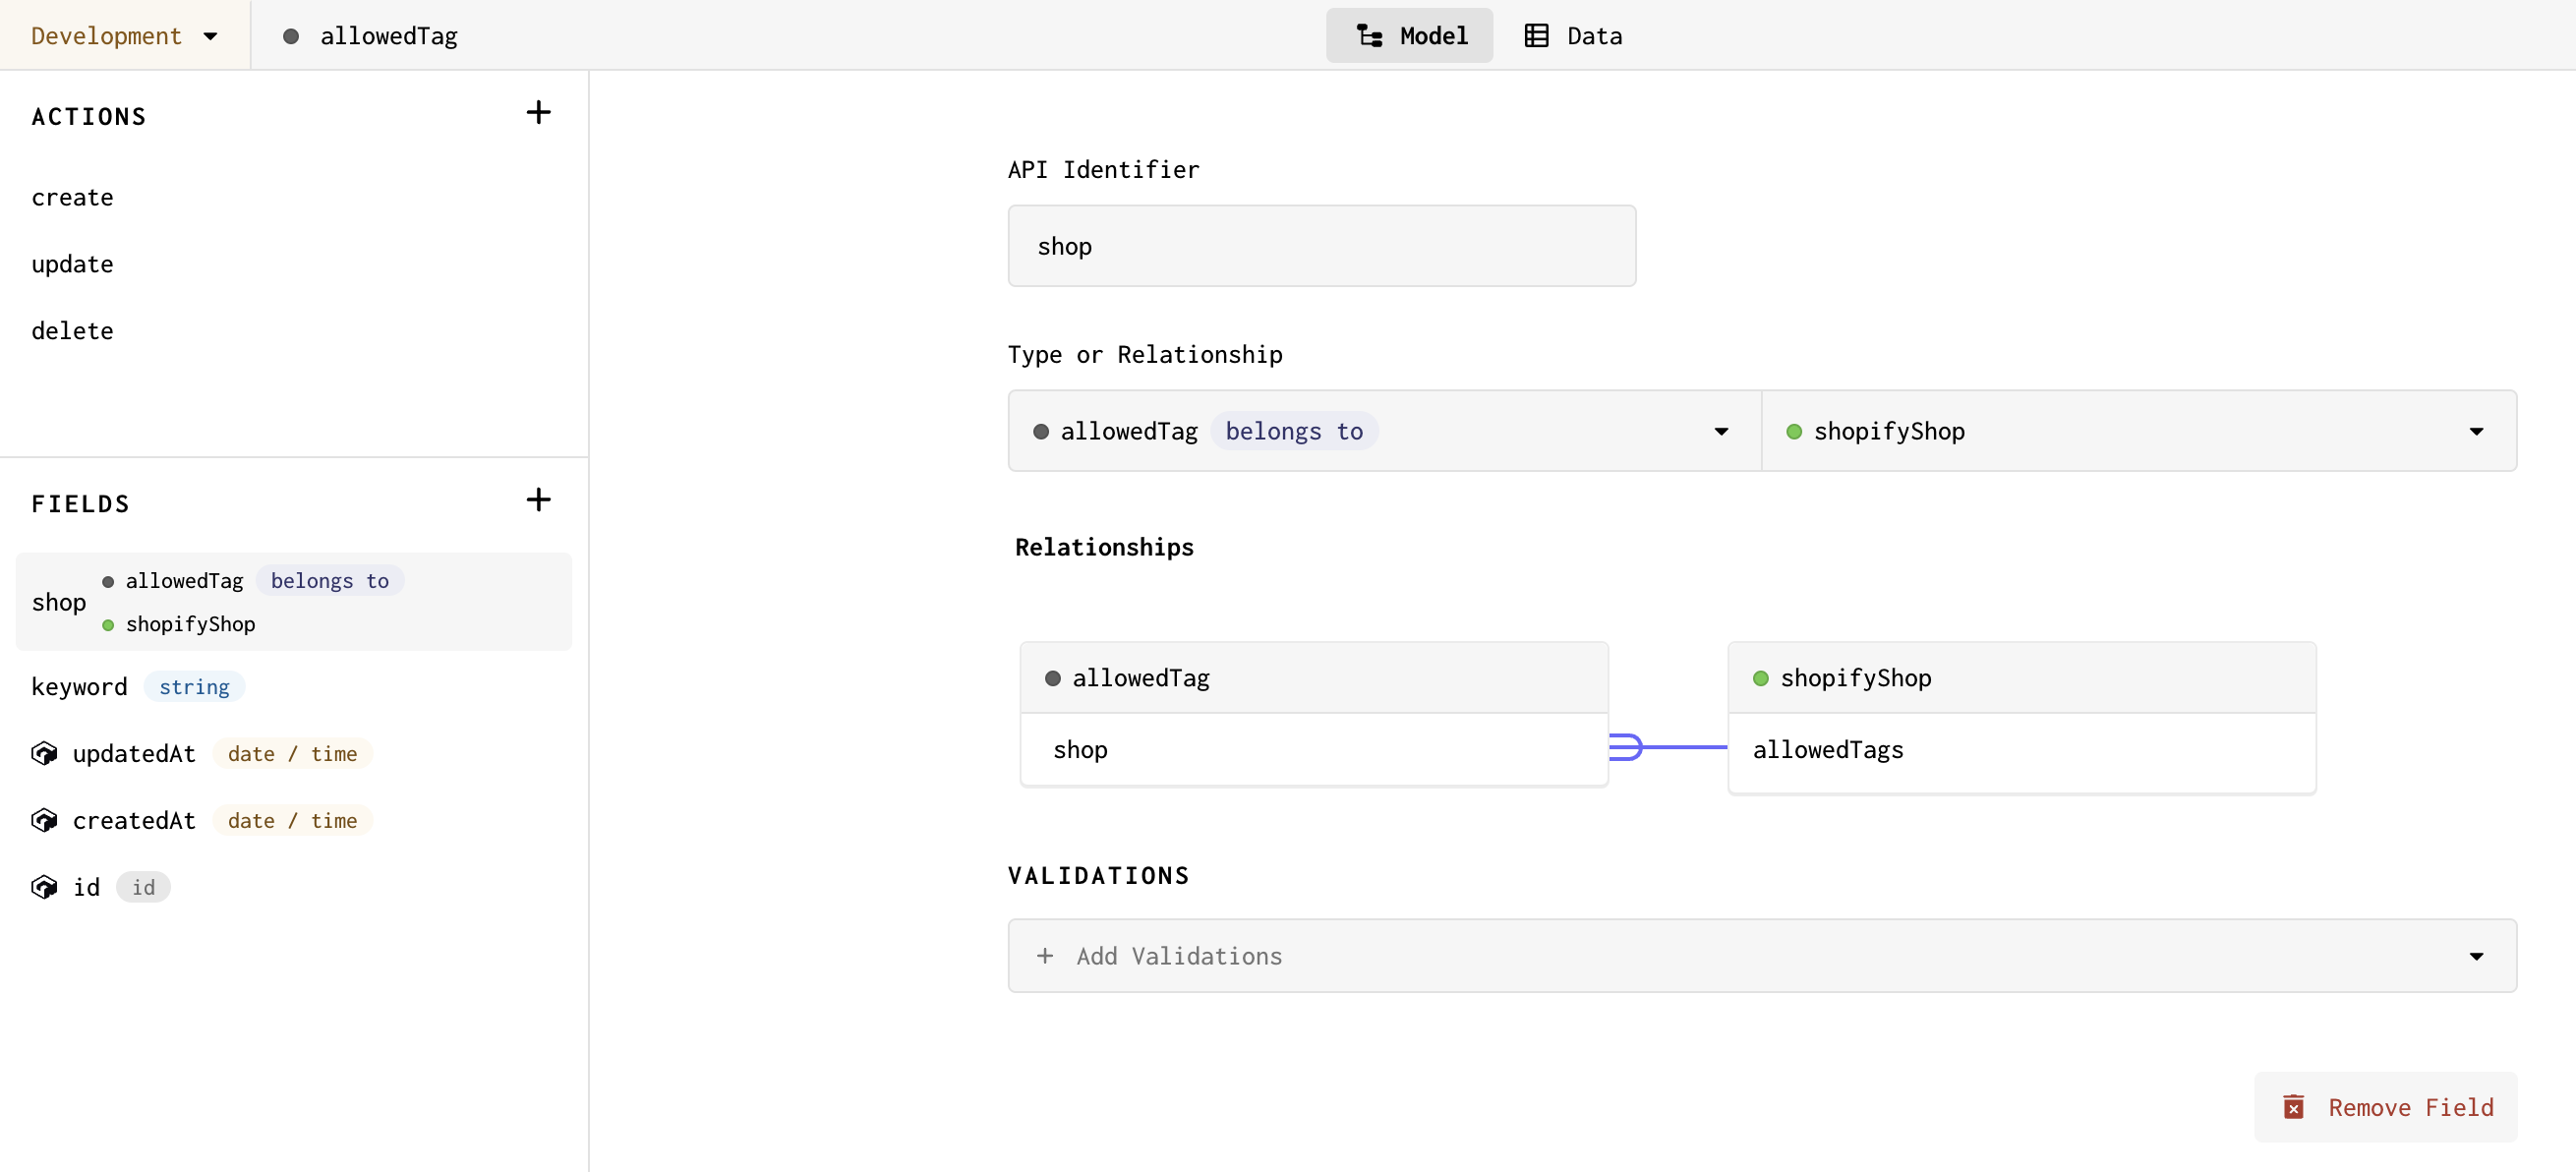 Screenshot of the Shop relation field on the allowedTag model, with allowedTag belonging to Shop